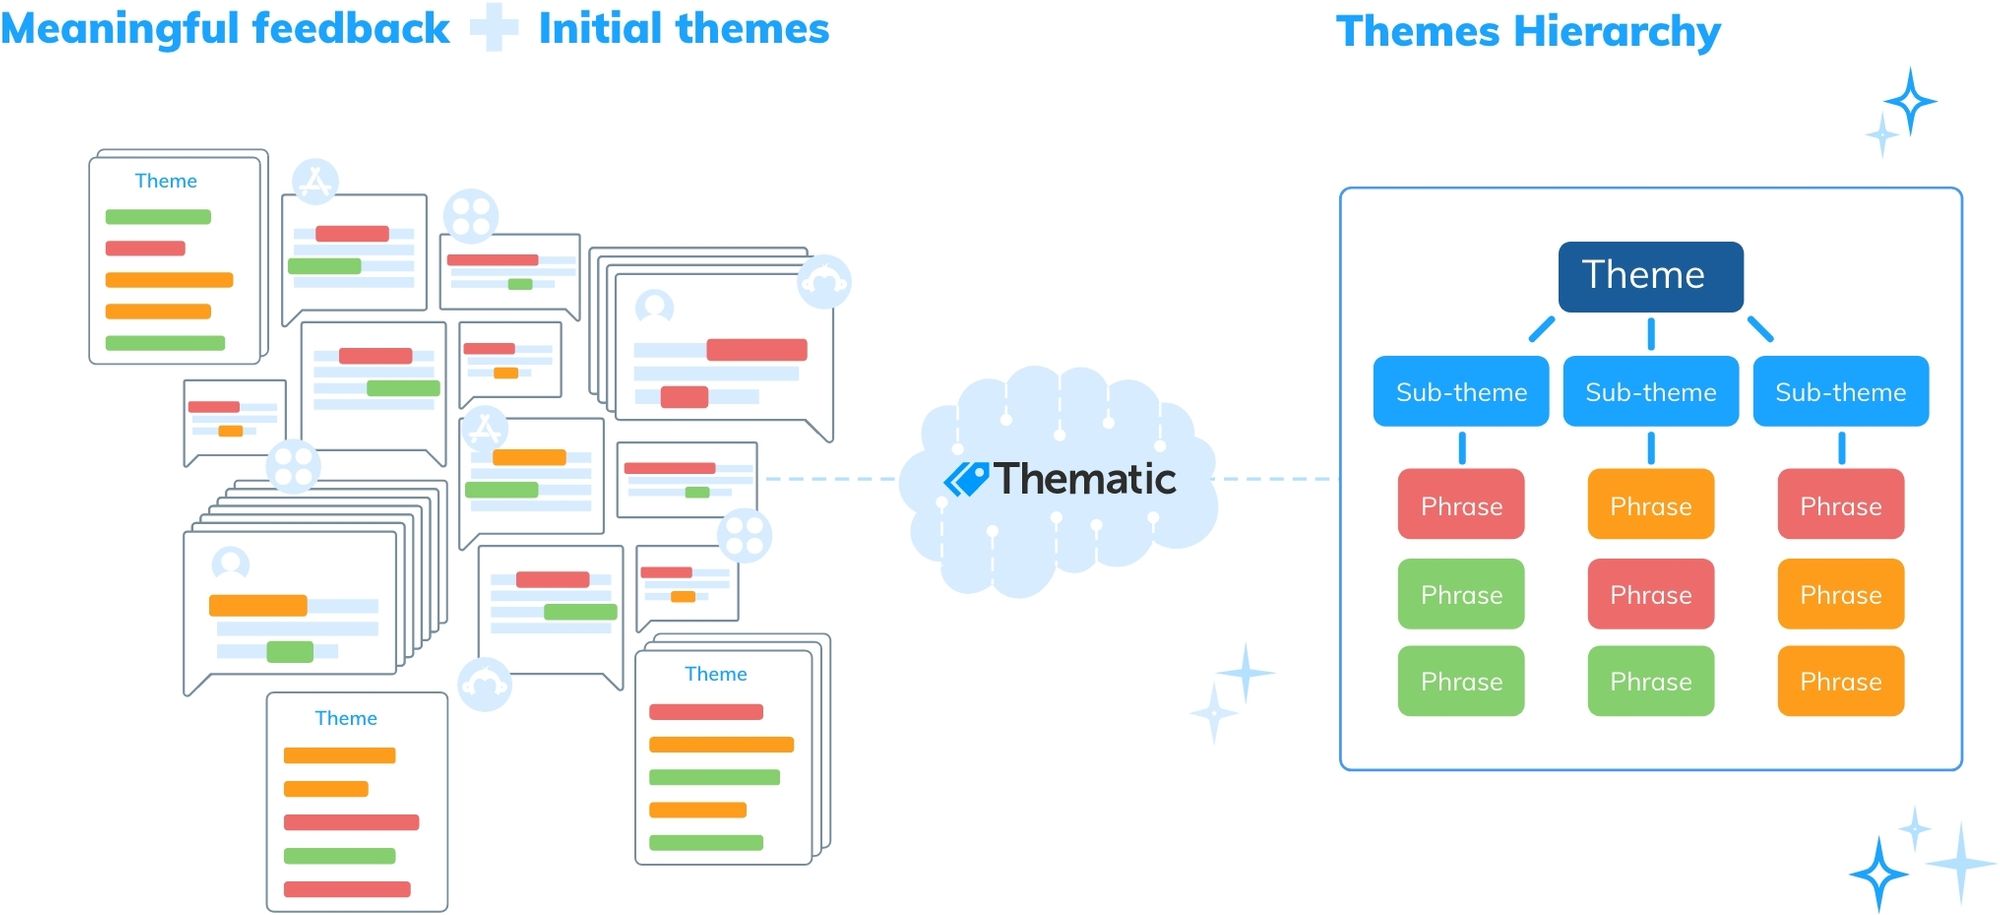 Creating a theme hierarchy